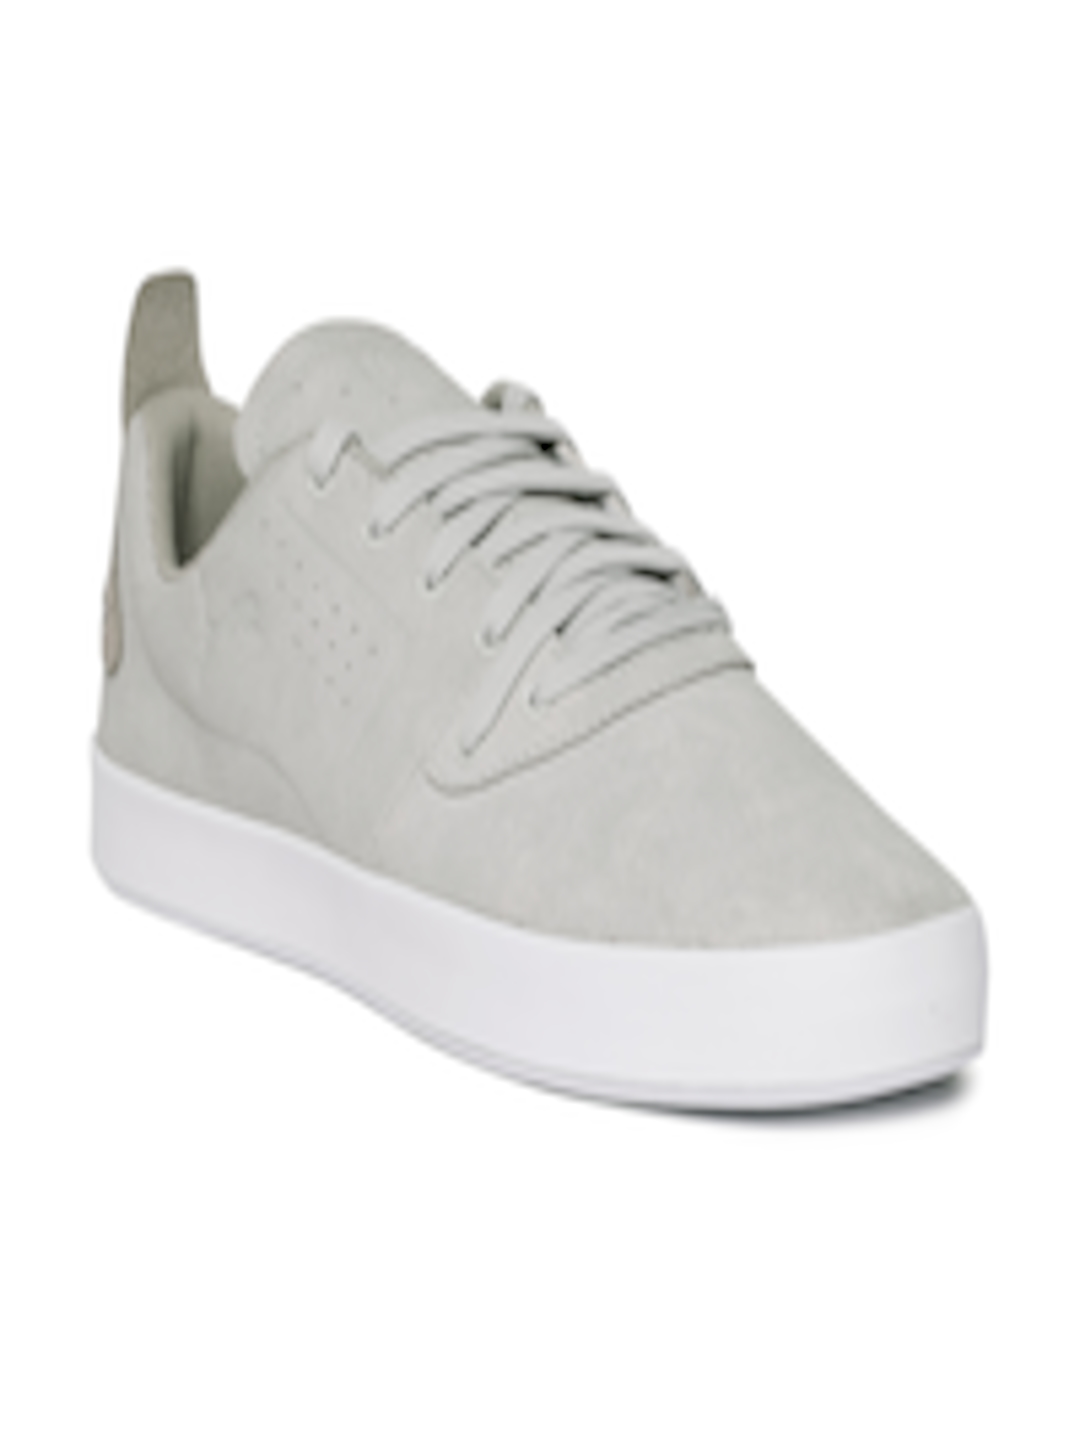 Buy Puma Men Grey Maestro Leather Sneakers - Casual Shoes for Men ...